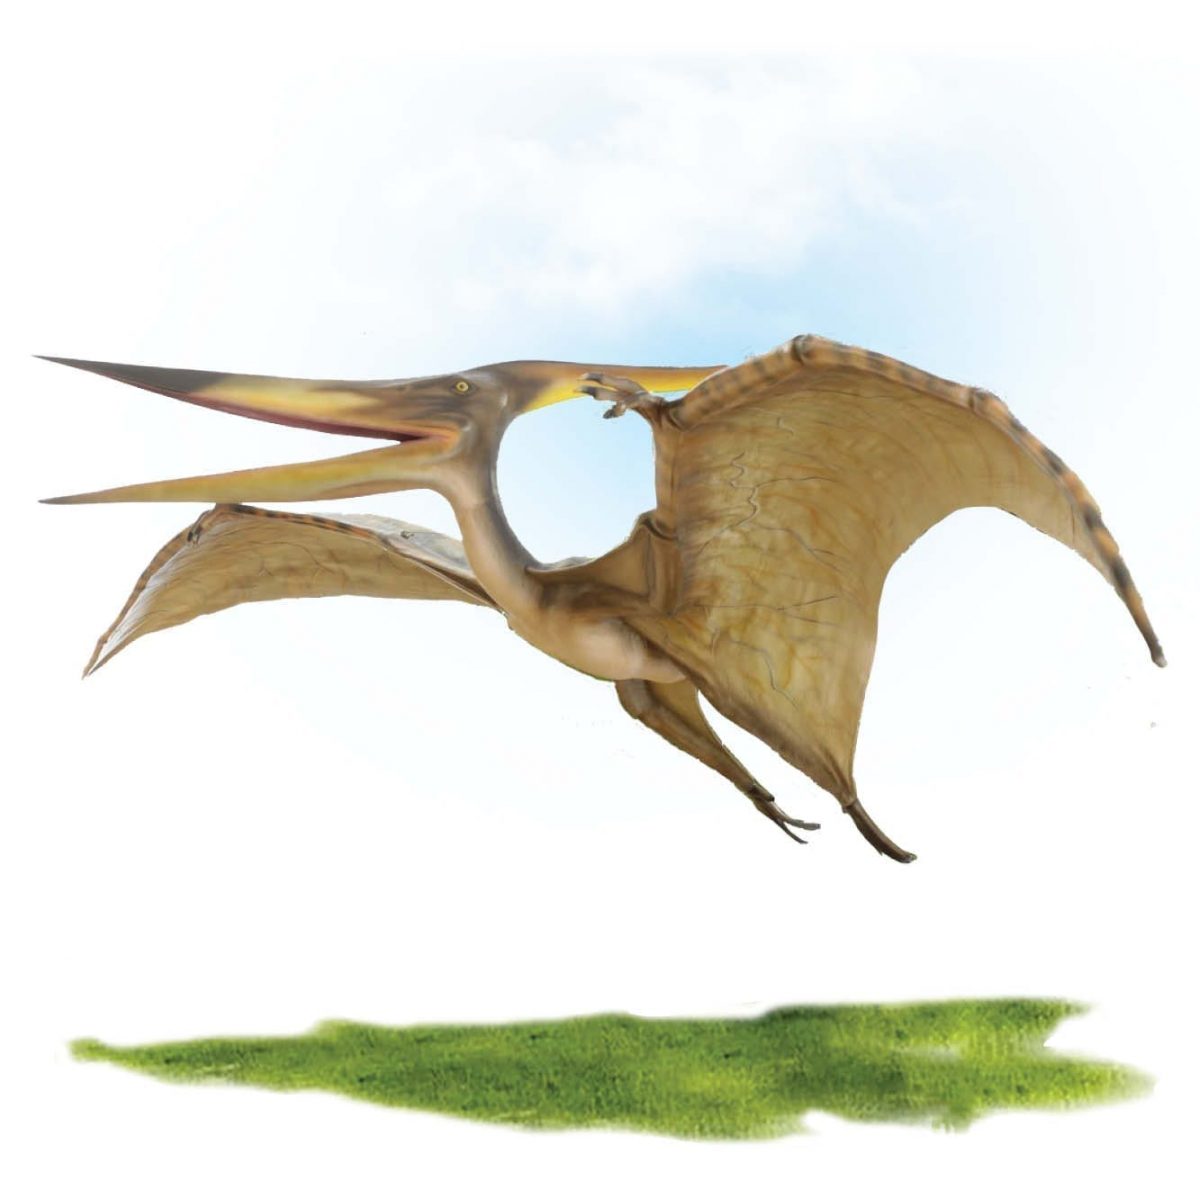 Pterodactyl vs Pteranodon: What's the Difference? - A-Z Animals